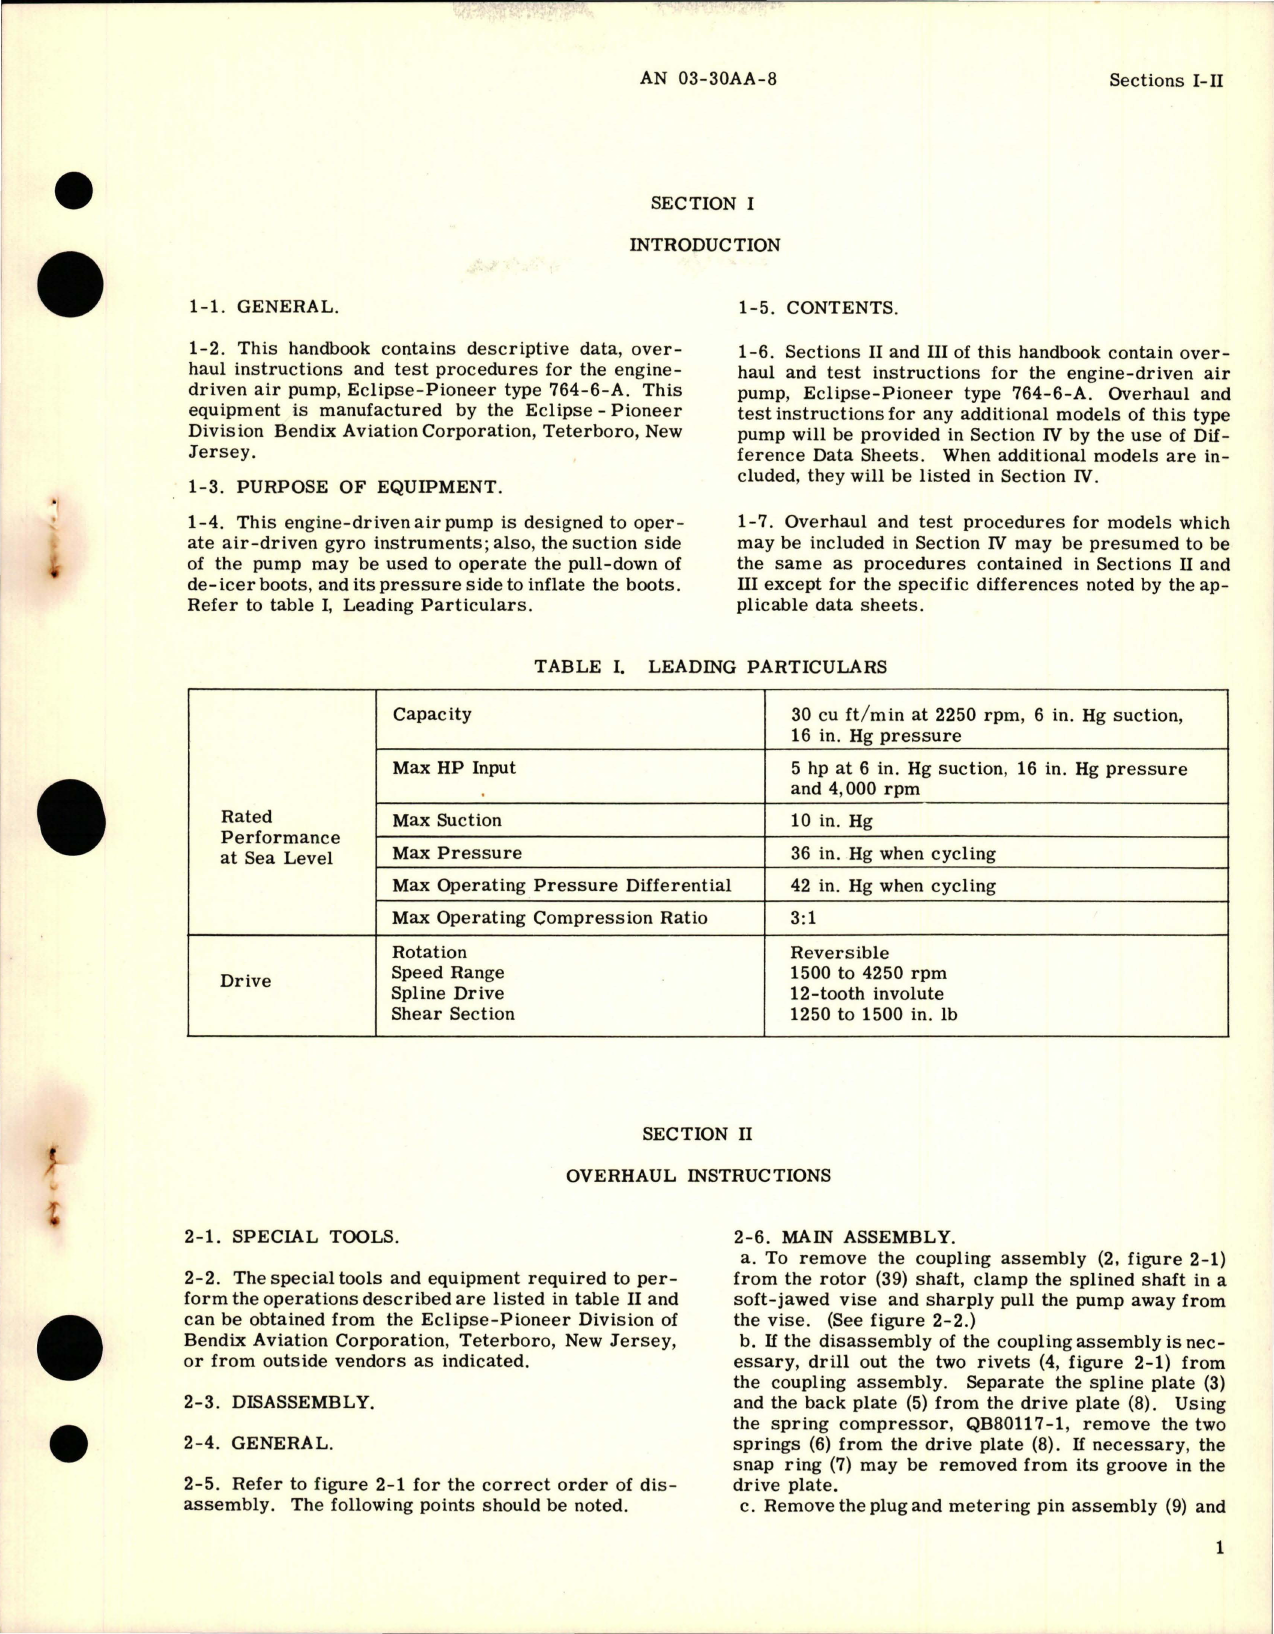 Sample page 7 from AirCorps Library document: Overhaul Instructions for Air Pump - Type 764-6-A